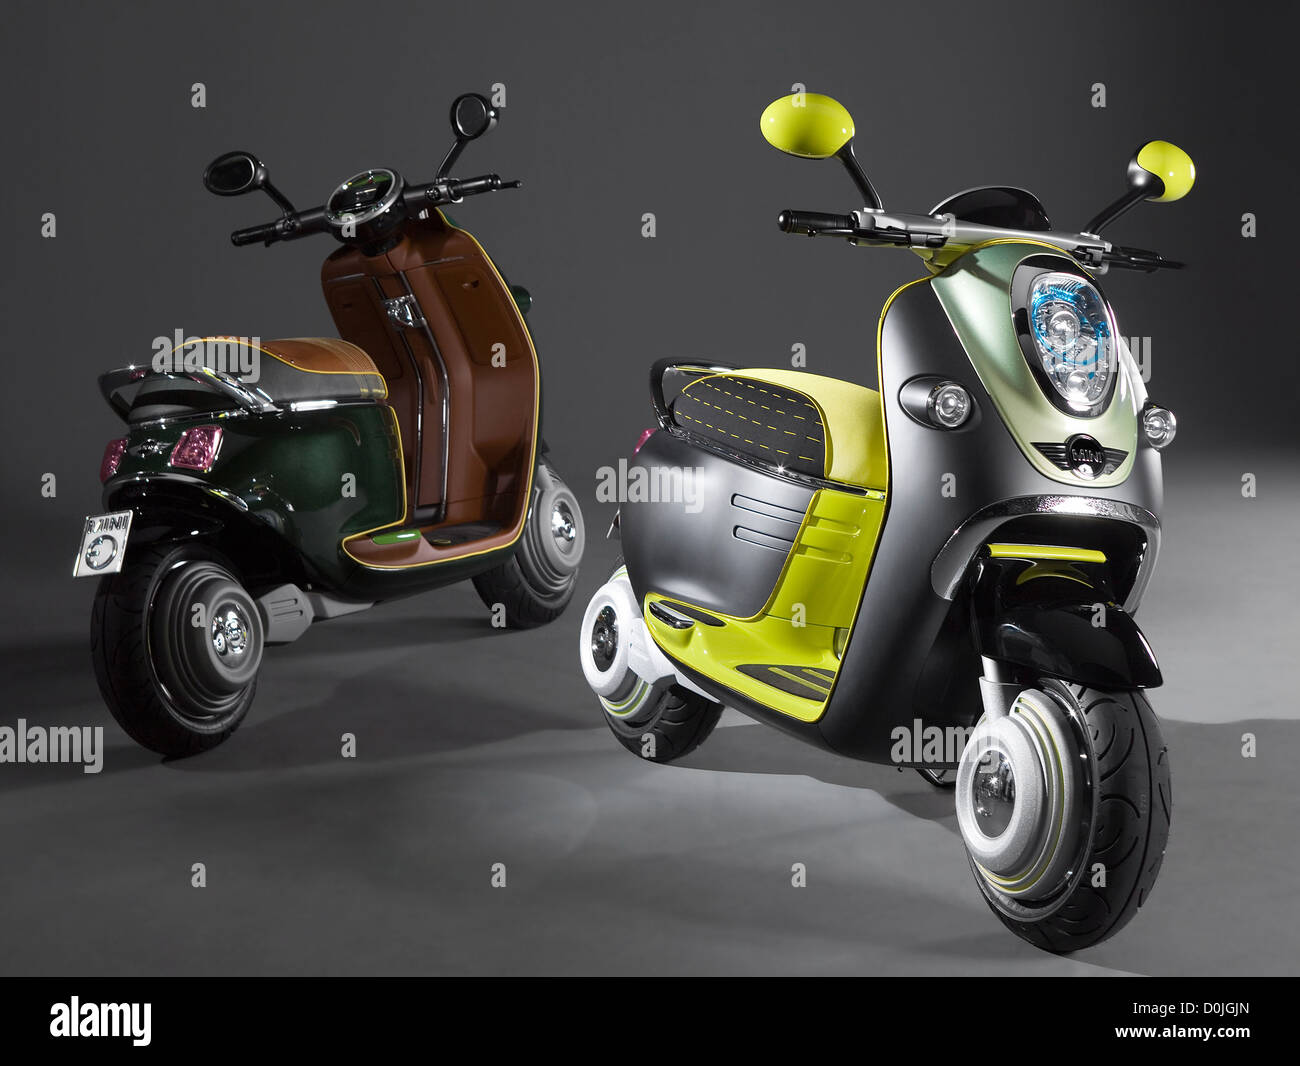 The MINI downsizes with electric scooter The future of the MINI is taking a turn on two wheels - engineers have unveiled a new Stock Photo